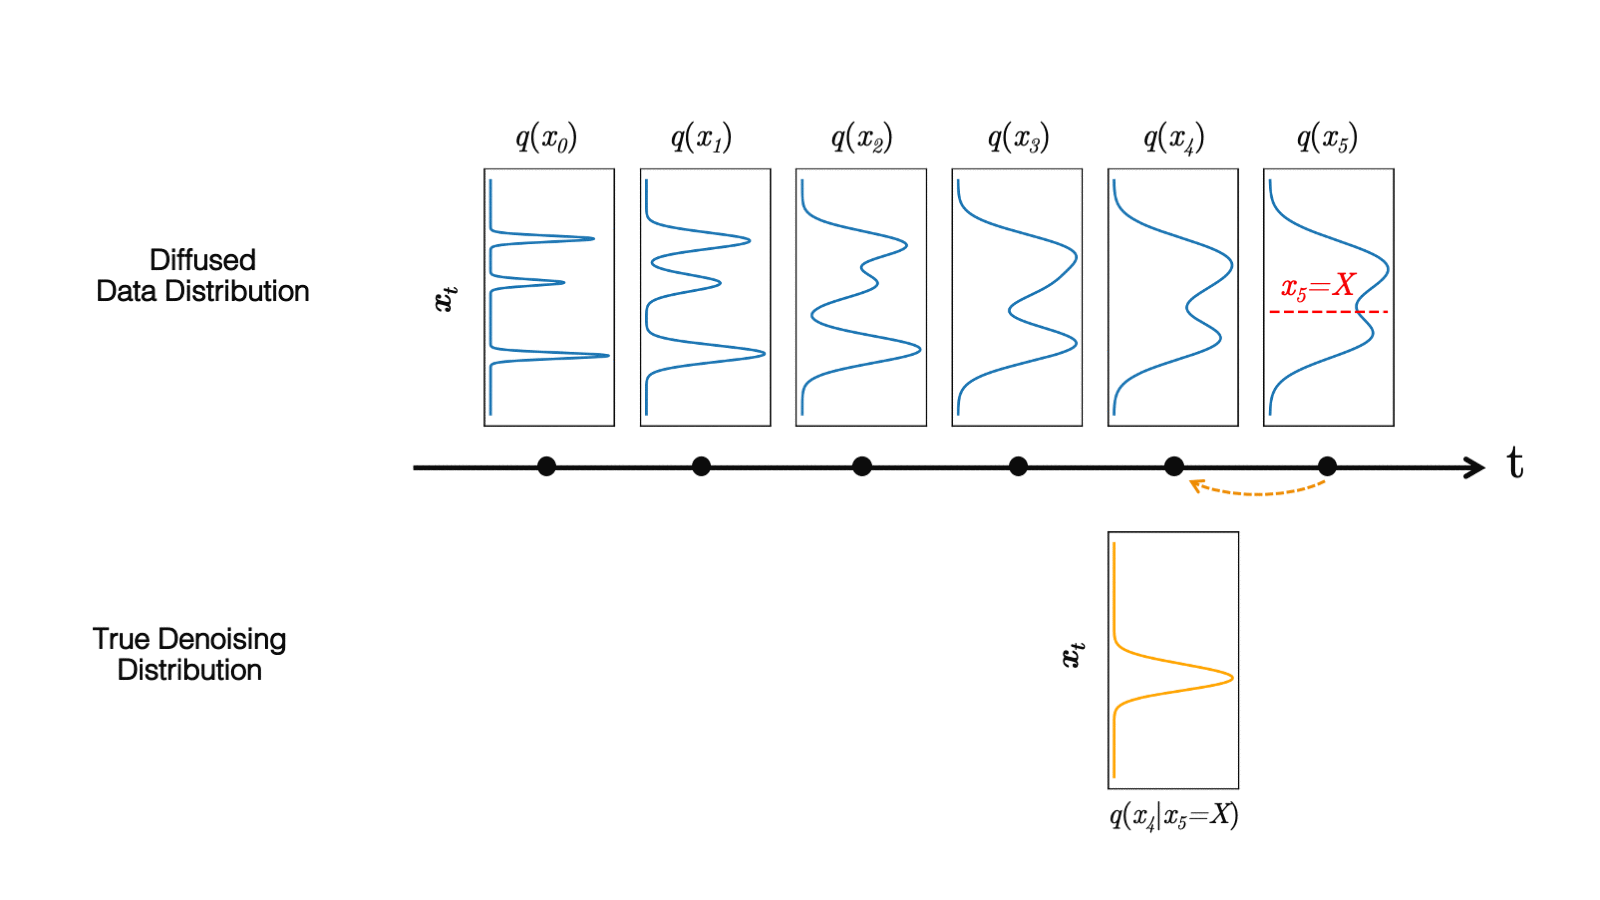 Visualization of diffused 1D data distributions in diffusion models and of the true denoising distributions for different step sizes during denoising.